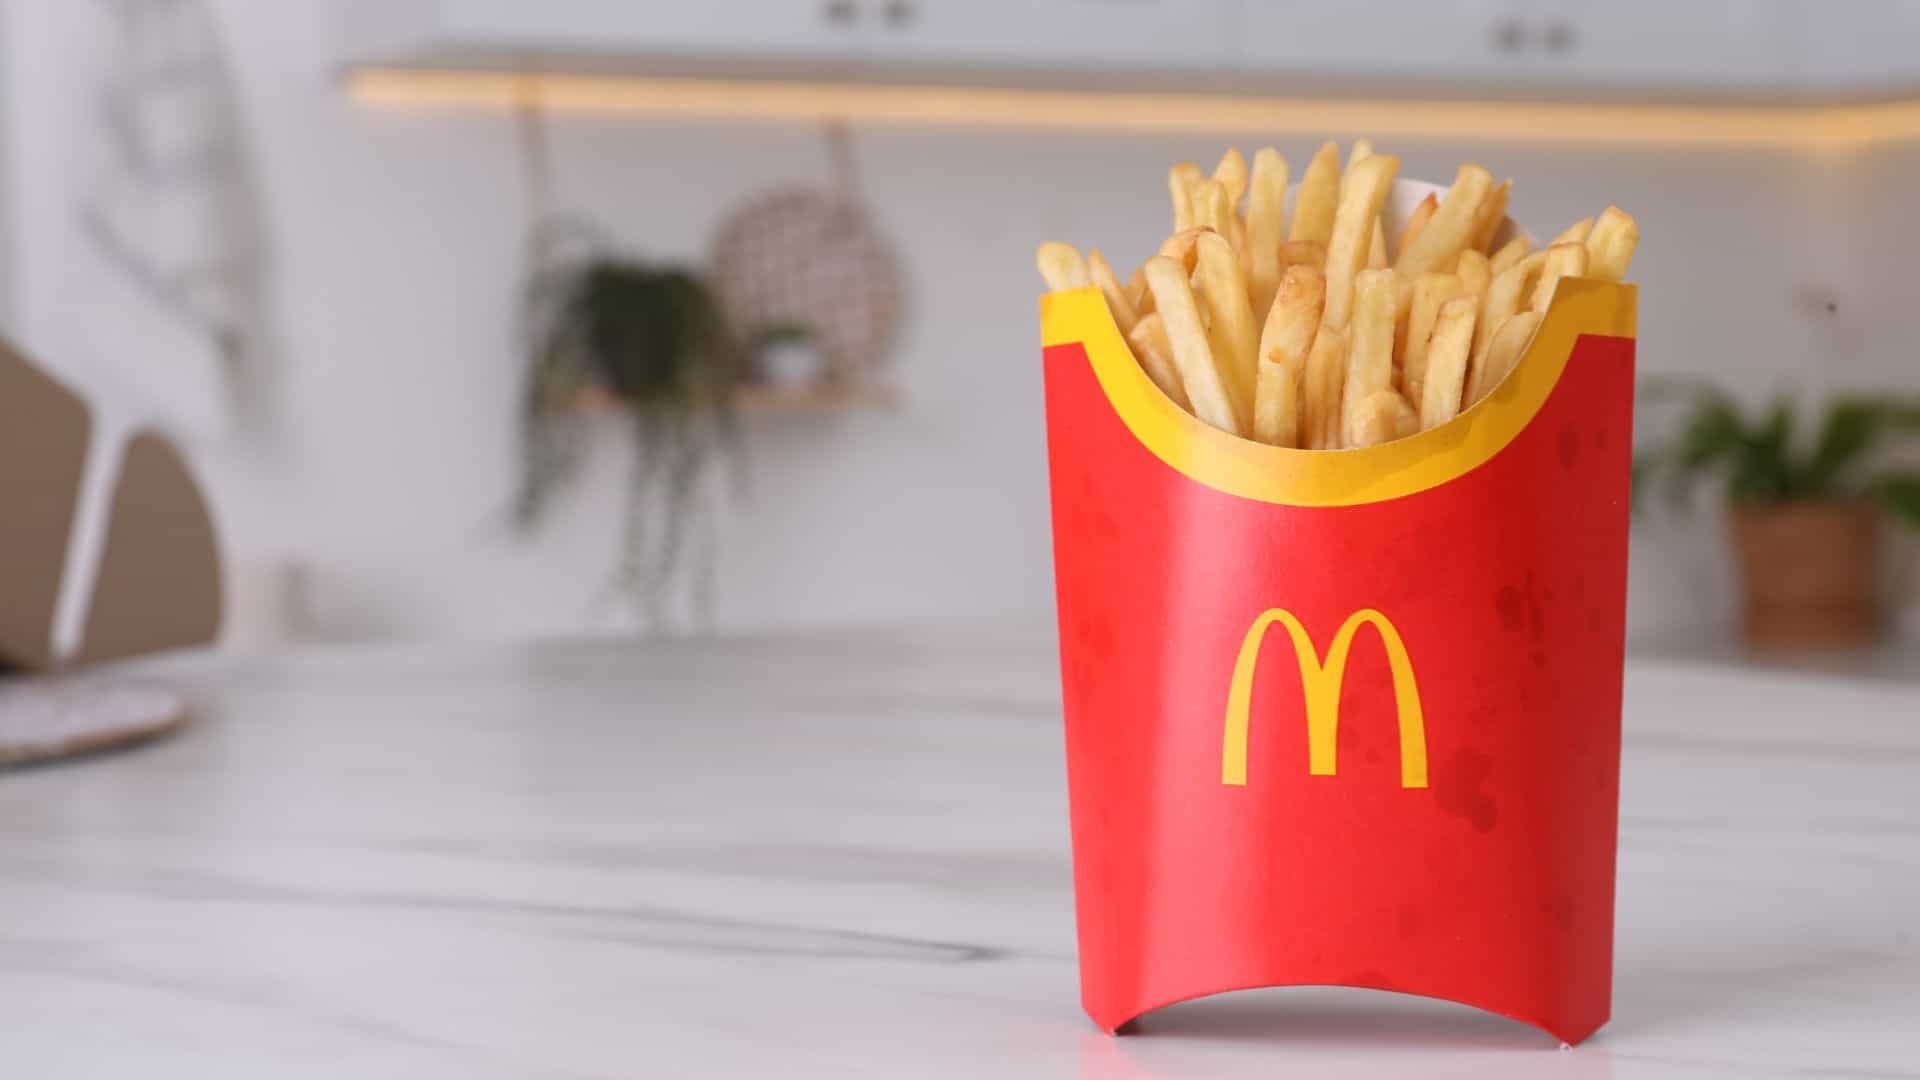 <p>Do you ever wonder what makes McDonald’s fries so crispy? It’s almost like they were made with love. Turns out they are!</p><p>All McDonald’s french fries are peeled and cut by hand, giving them the perfect shape. The potatoes are then blanched to soften them up. Then, they’re given a light fry in hot oil before being dried and frozen.</p><p>This frozen half-cooked goodness then makes its way to the McDonald’s branches, where workers refry them to completely cook them off and give them a perfect crisp.</p>